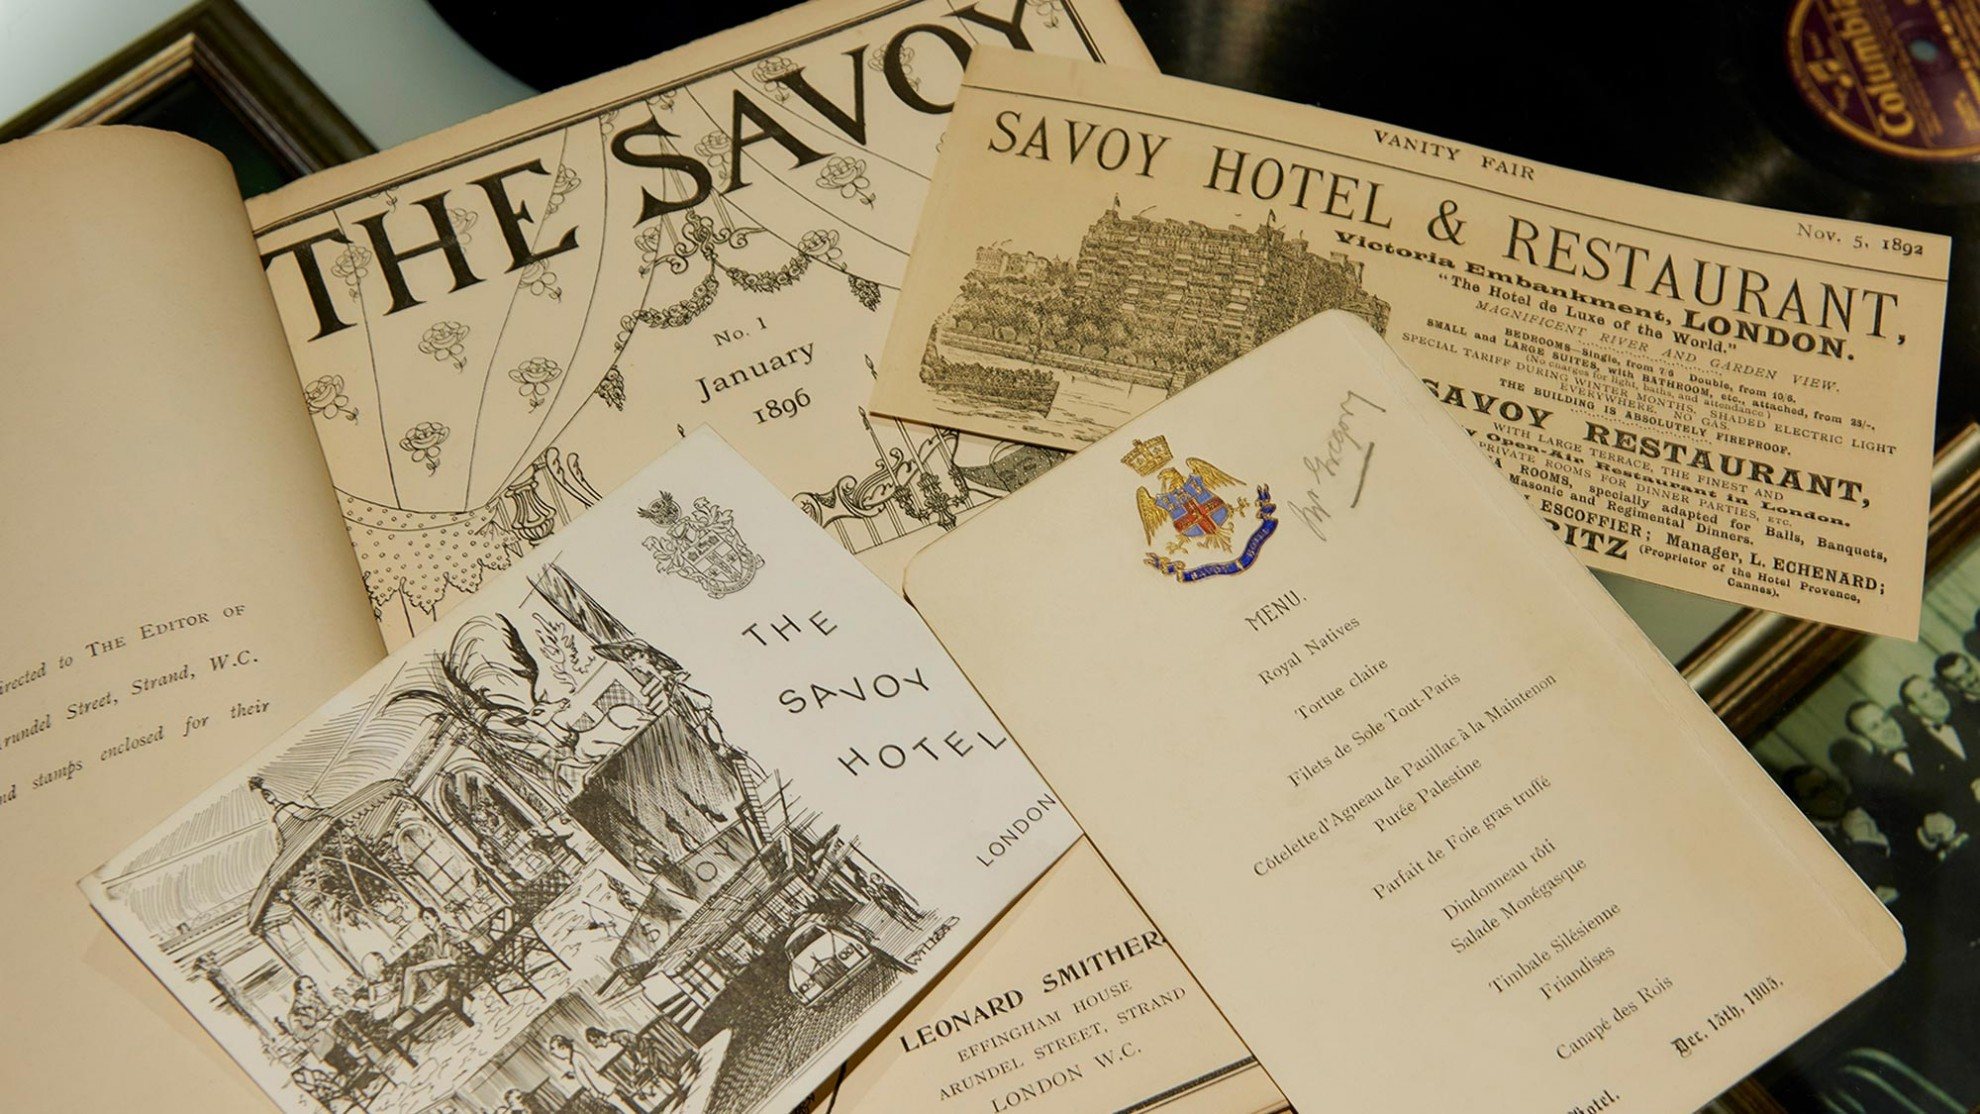 The Savoy Hotel in London history